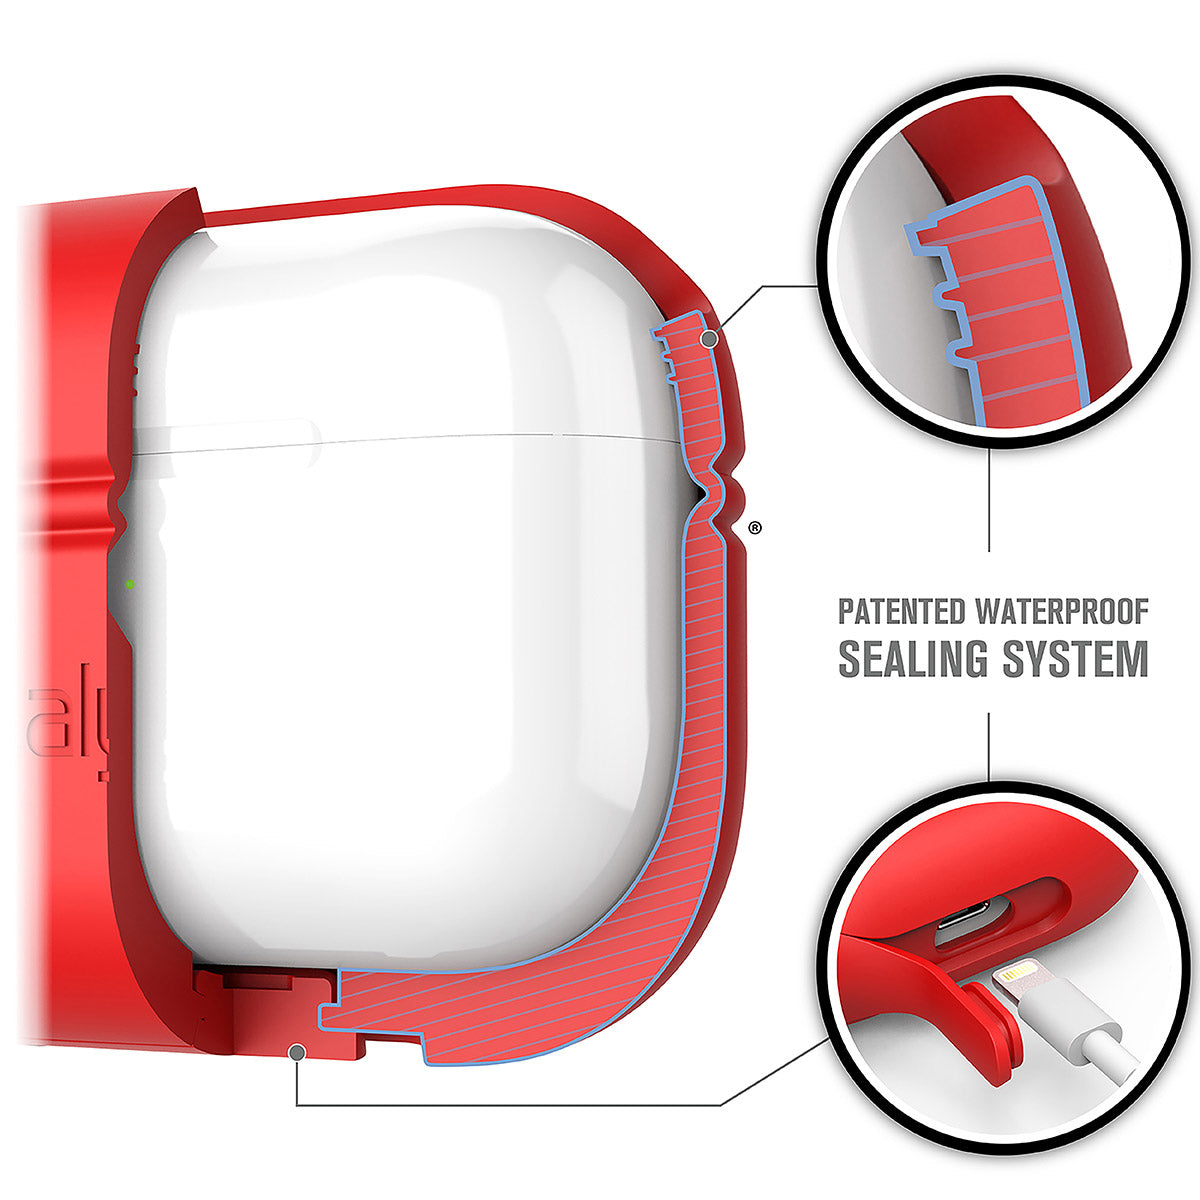 CATAPLAPDPRORED | catalyst airpods pro gen 2 1 waterproof case carabiner special edition red showing the patented waterproof sealing system texts reads patented waterproof sealing system